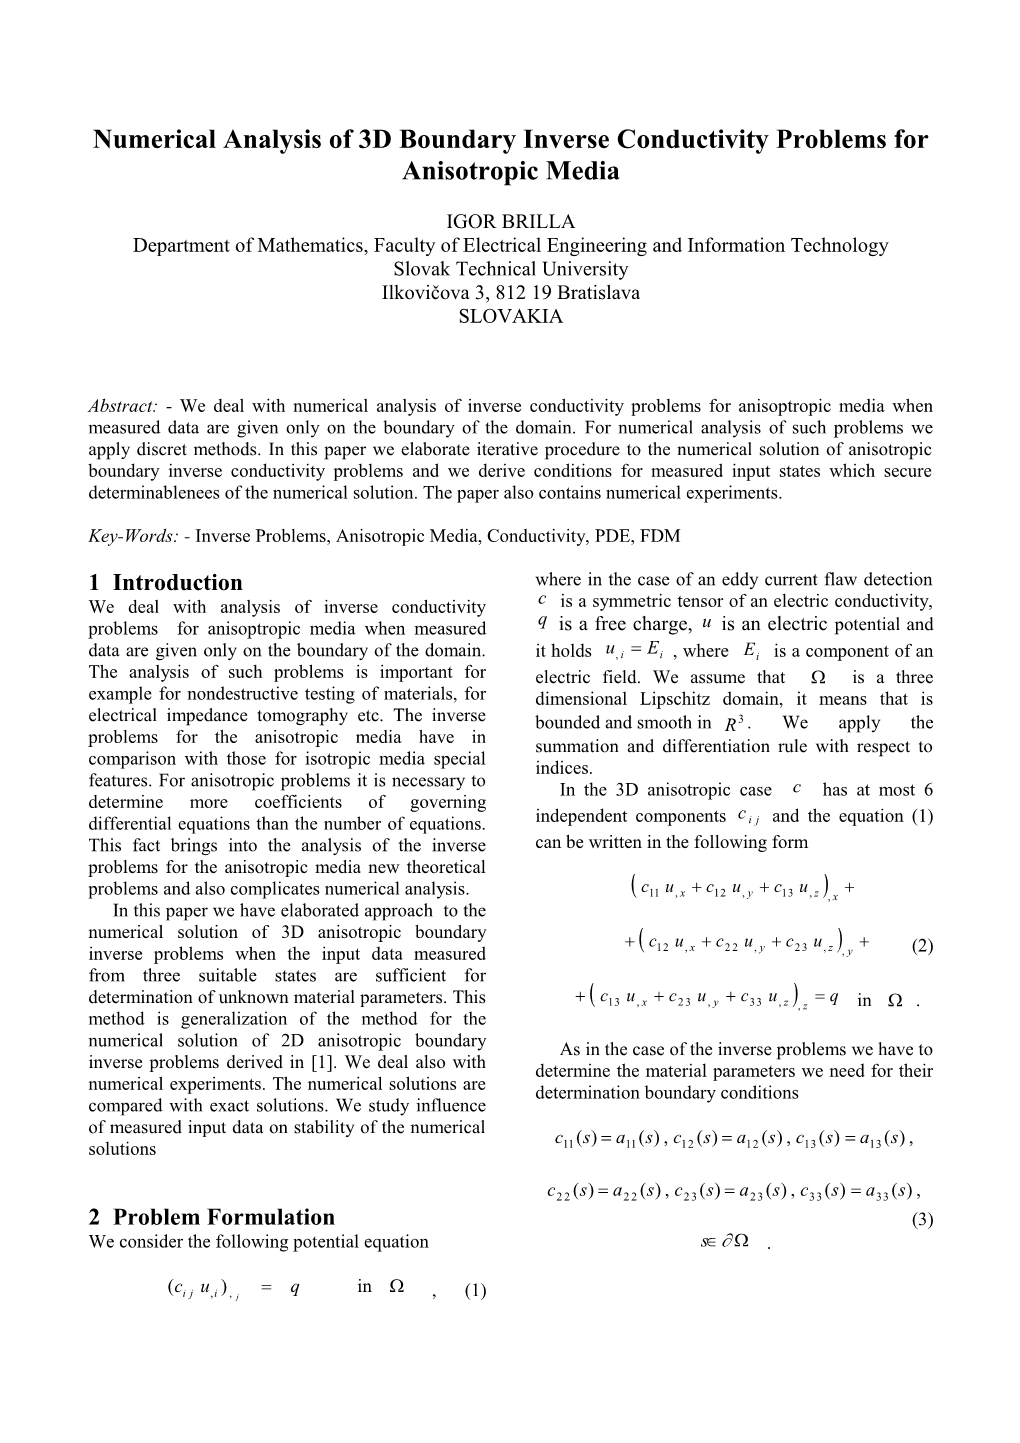 Numerical Analysis of 3D Boundary Inverse Conductivity Problems For